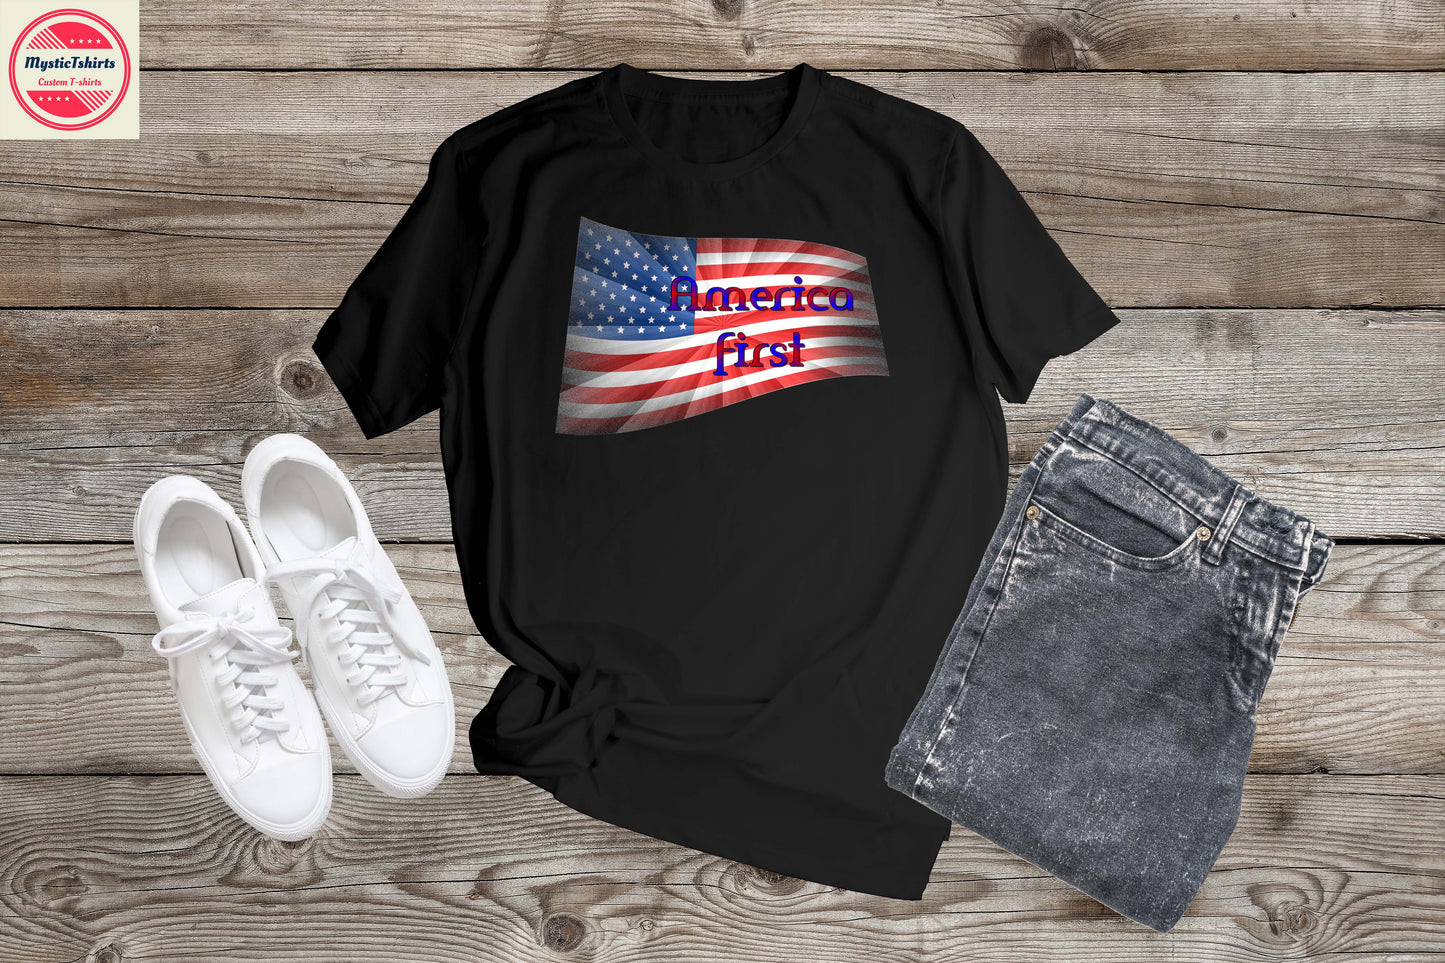 014. AMERICA FIRST, Custom Made Shirt, Personalized T-Shirt, Custom Text, Make Your Own Shirt, Custom Tee